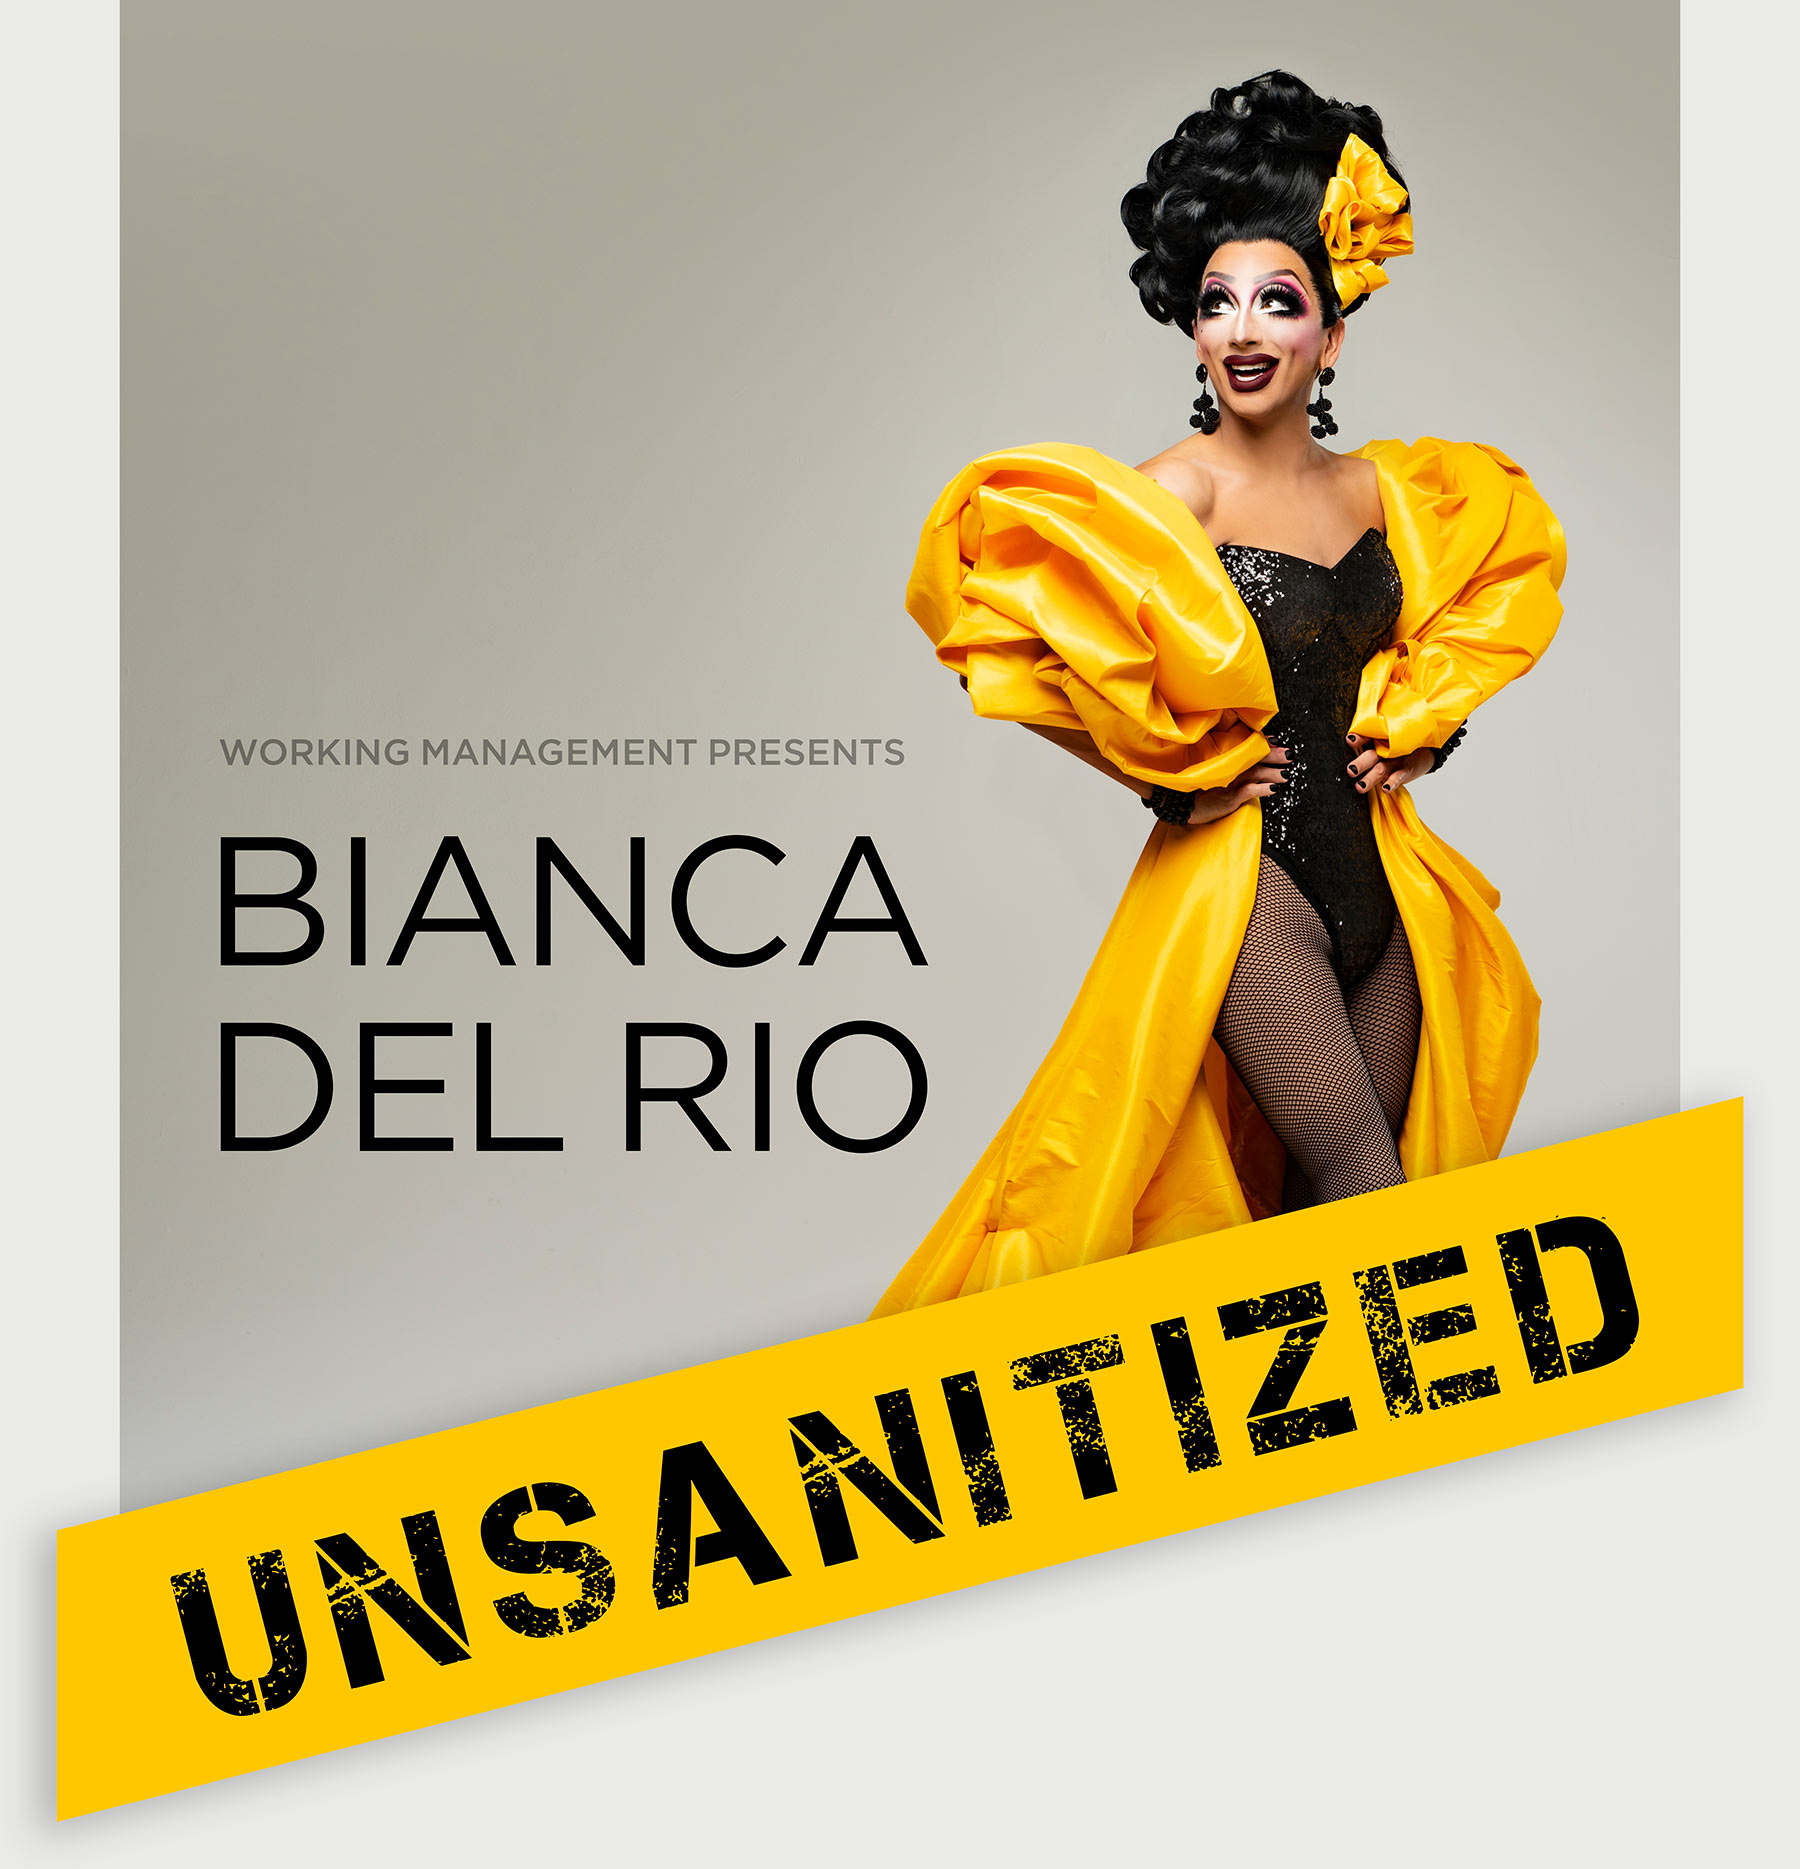 Bianca Del Rio wearing a black dress with bright yellow plastic draped coat, with large UNSANITIZED word placed over top